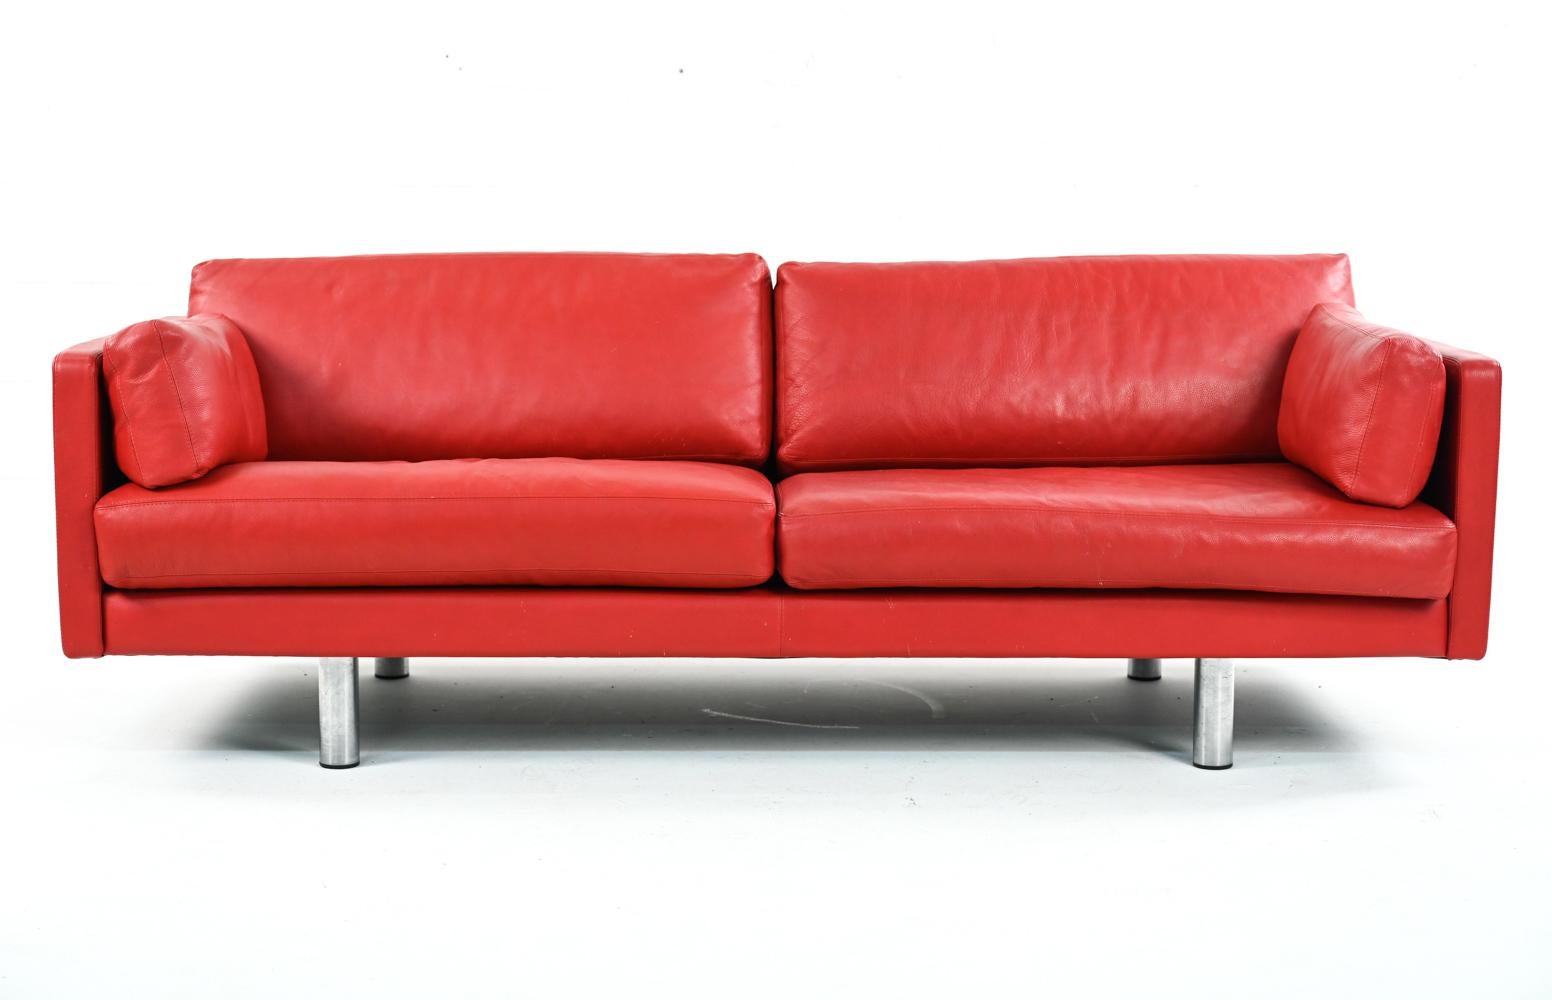 Danish mid-century sofa upholstered in red leather with chrome legs.